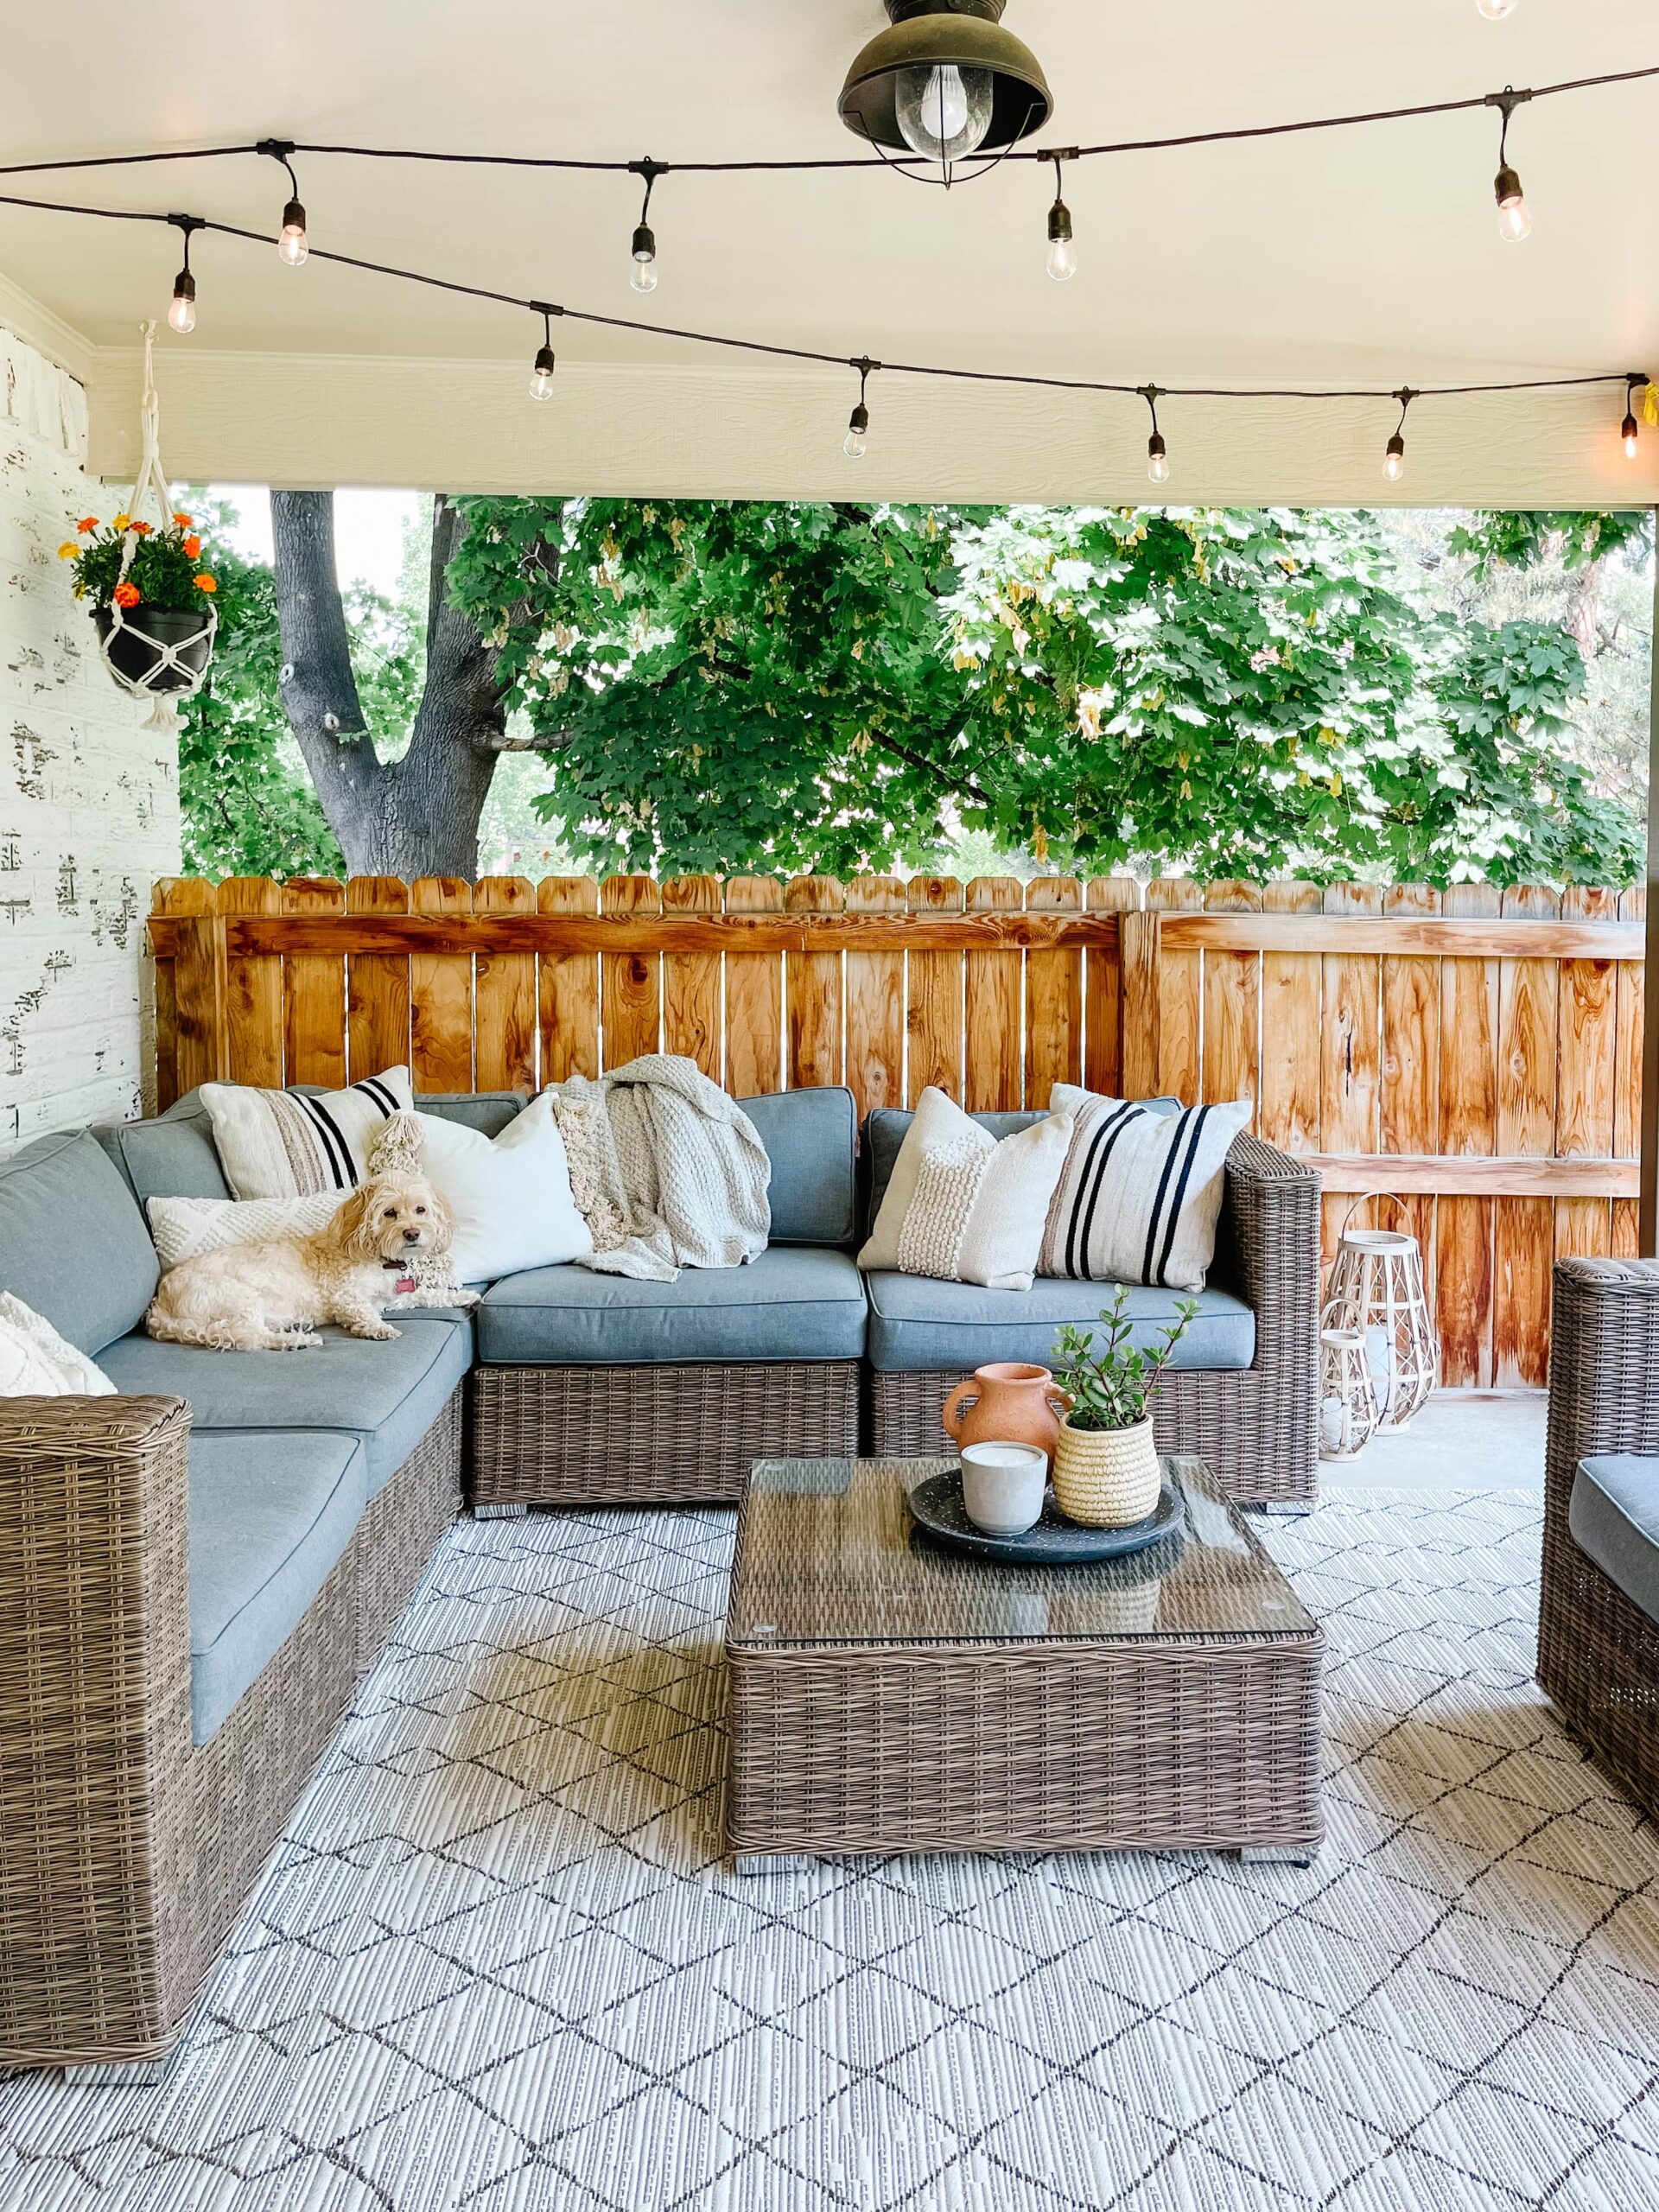 my top outdoor furniture picks from wayfair for the summer 2022 season